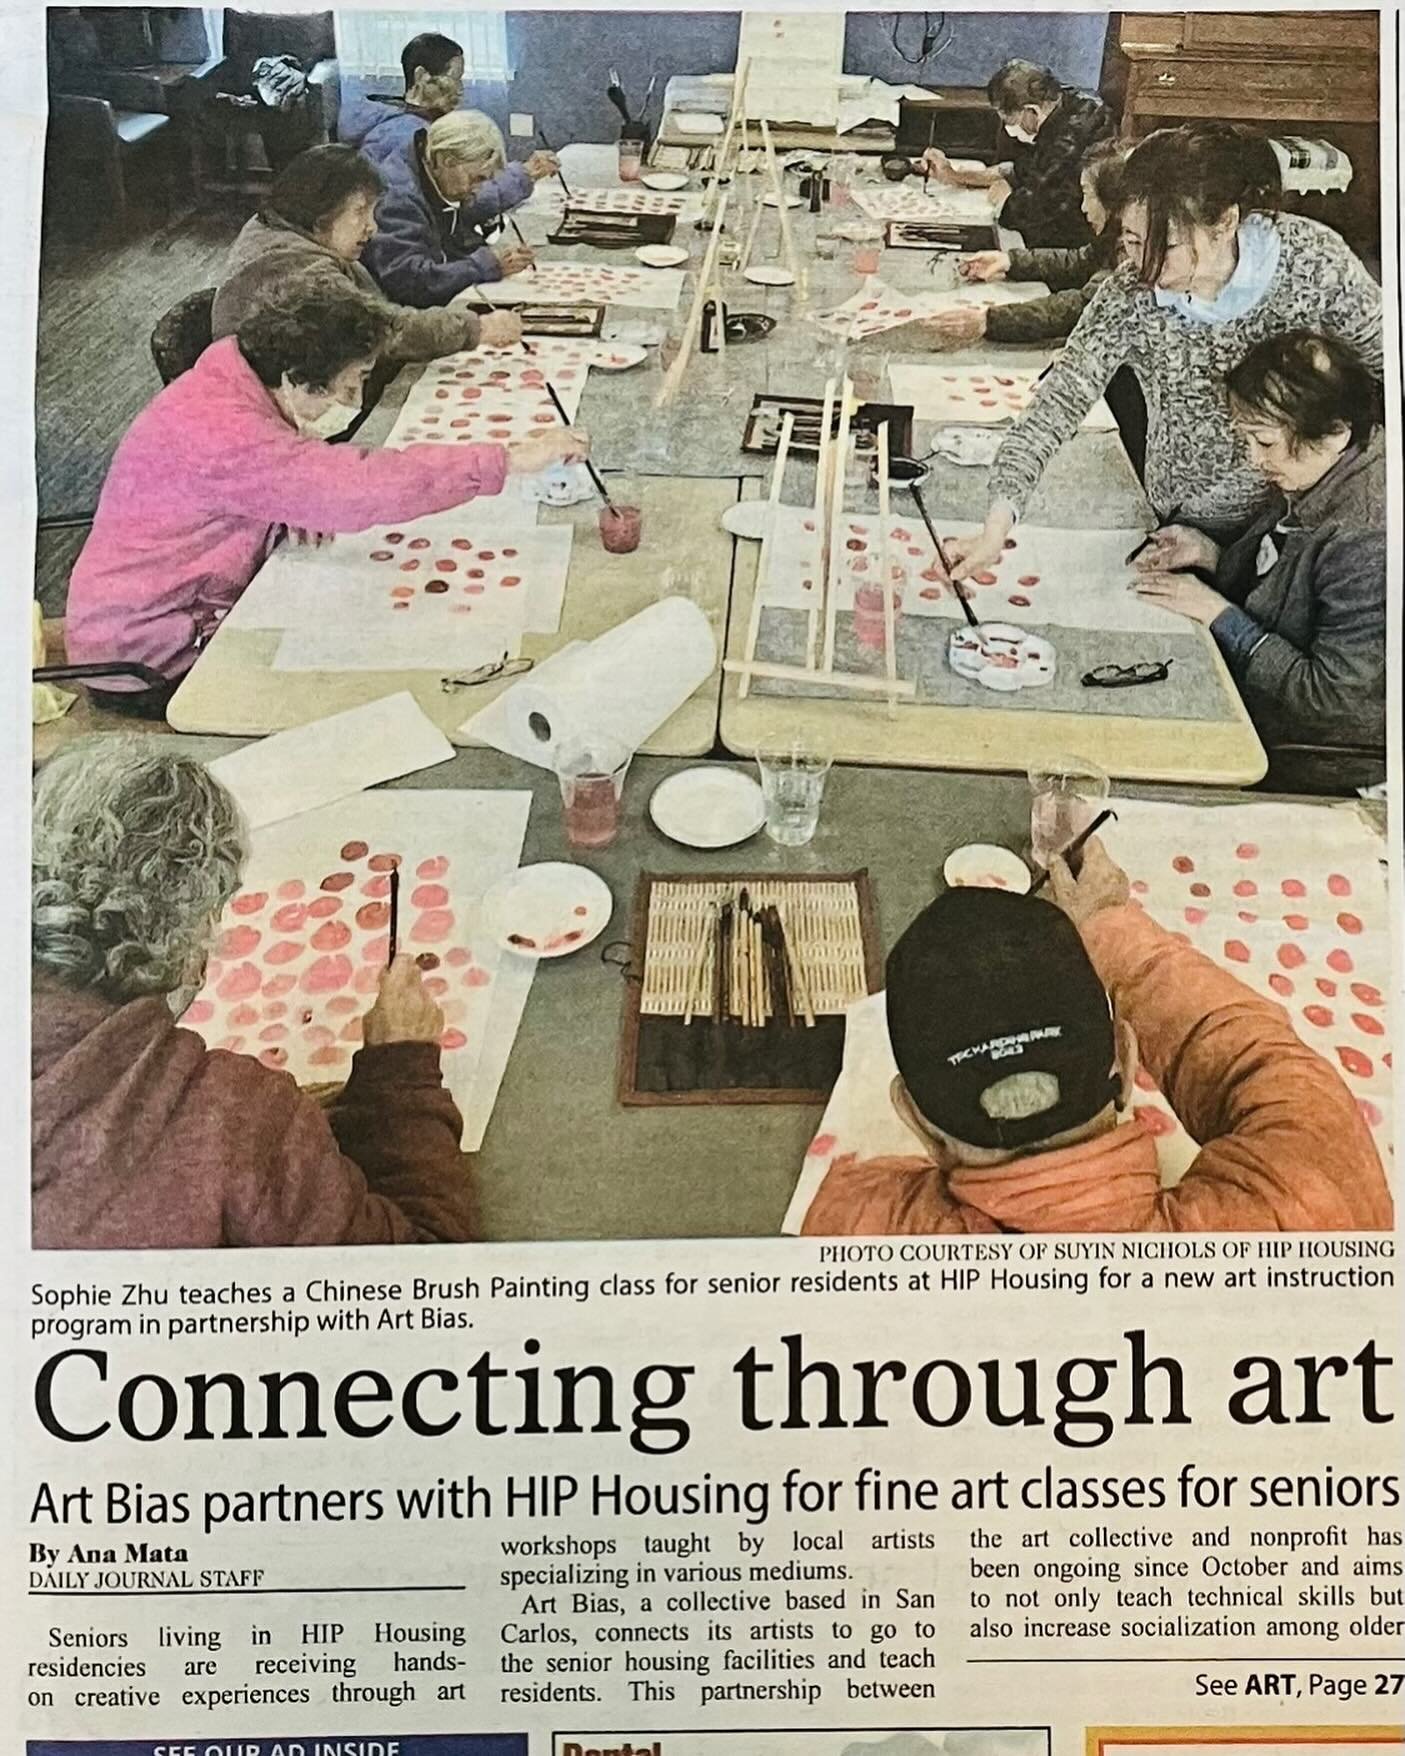 Thank you to the San Mateo Daily Journal for covering the exciting art program that Art Bias and Dragonfly Community Arts are offering at the HIP Housing senior residencies in San Mateo in their April 5 publication.

Journalist Ana Mata reported how 